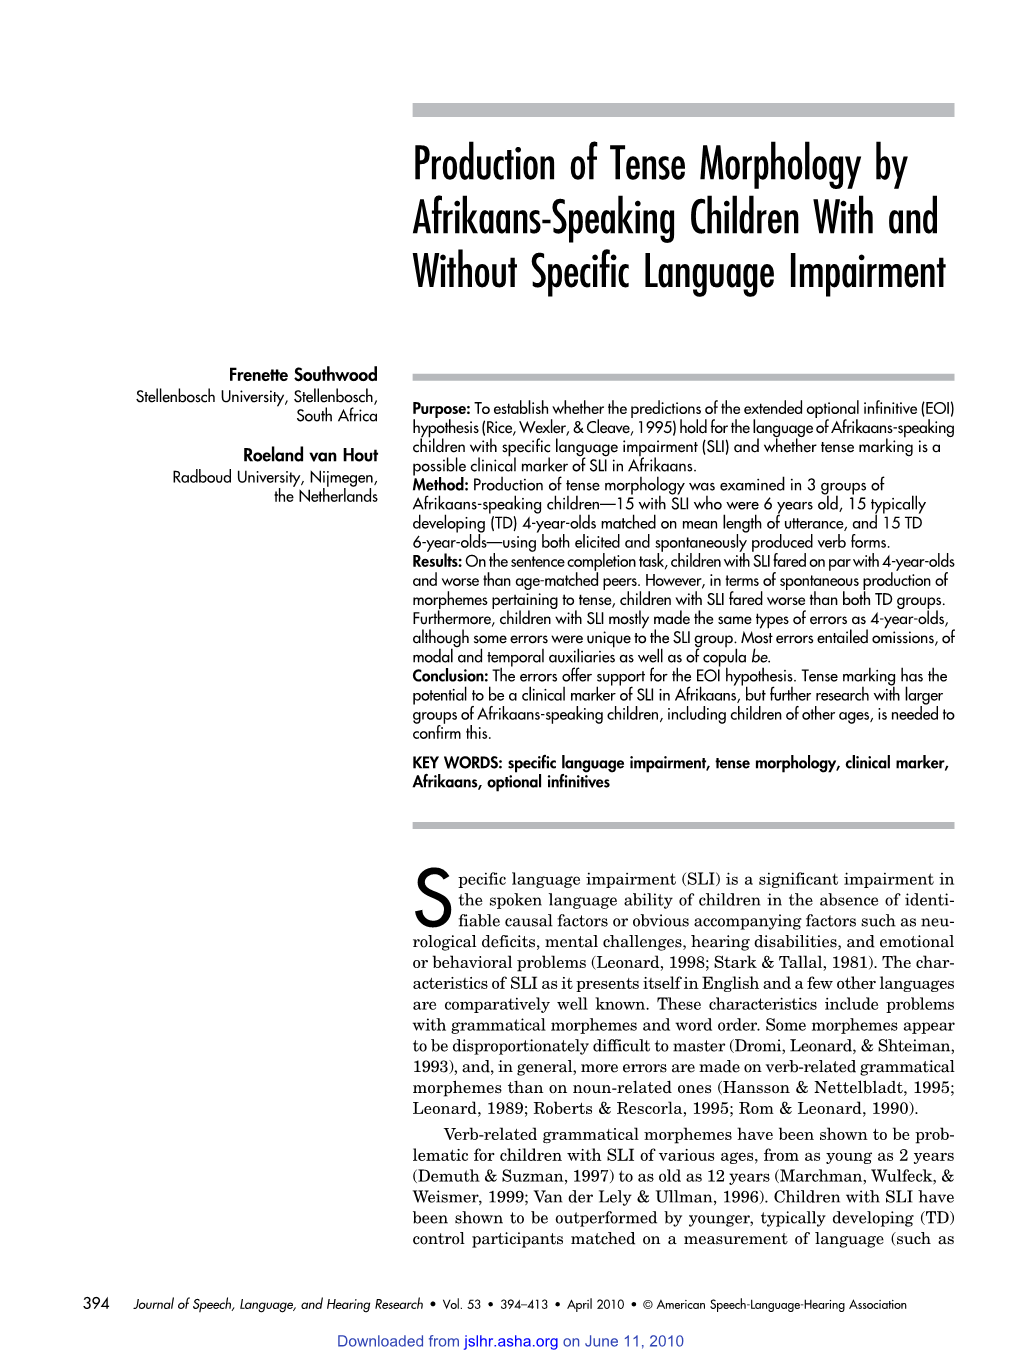 Production of Tense Morphology by Afrikaans-Speaking Children with and Without Specific Language Impairment